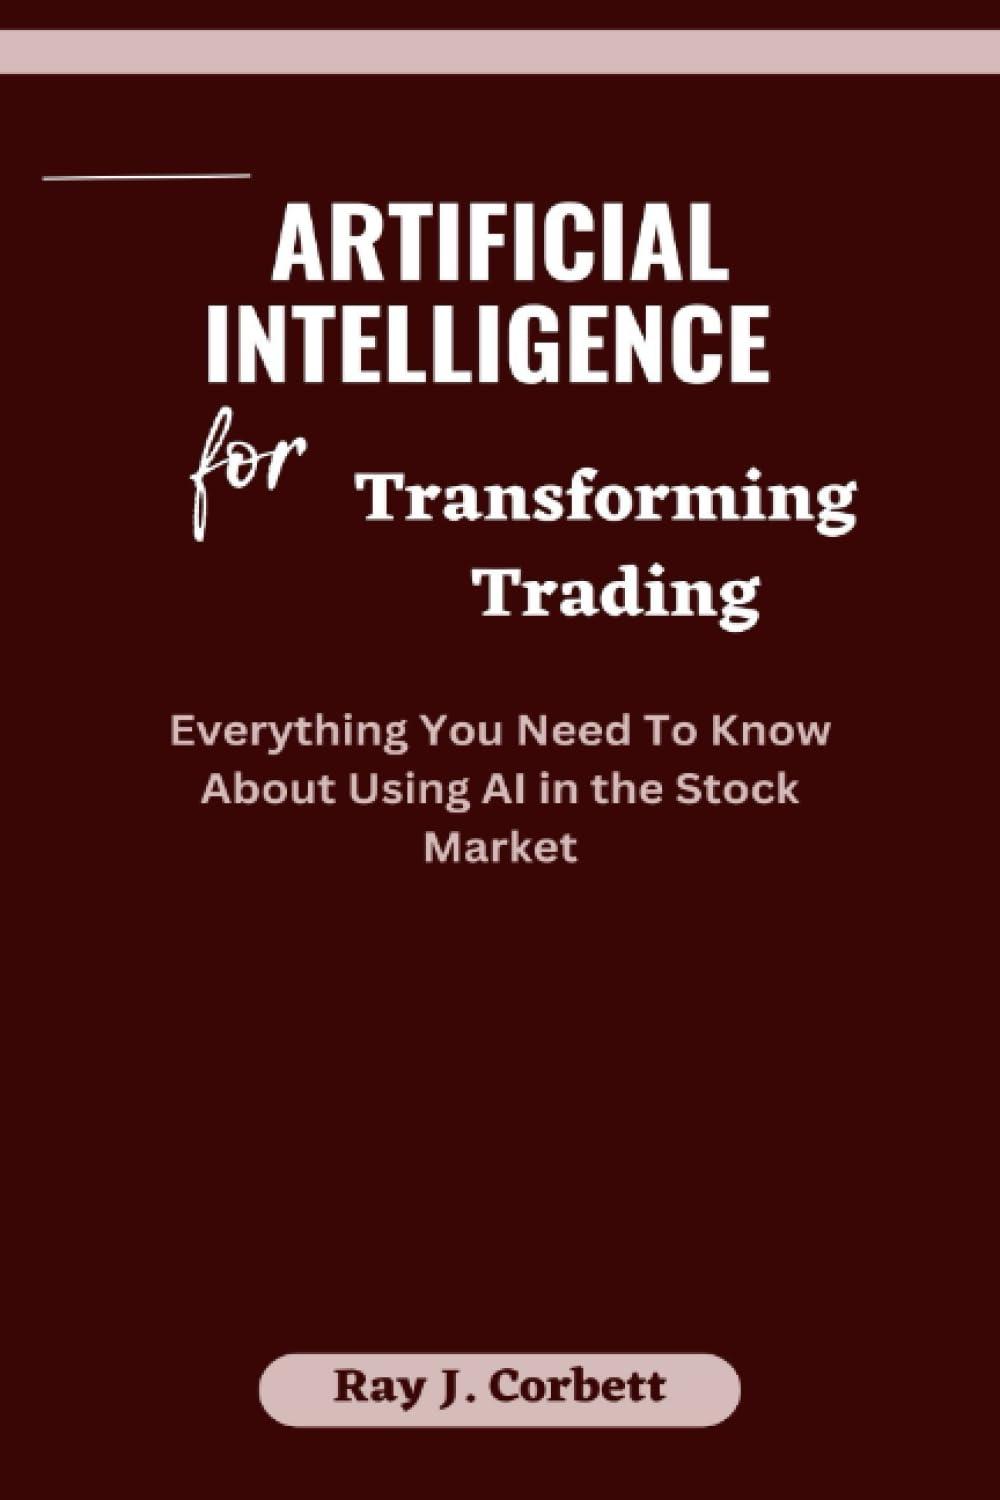 Artificial Intelligence In Transforming Trading Everything You Need To Know About Using AI In The Stock Market